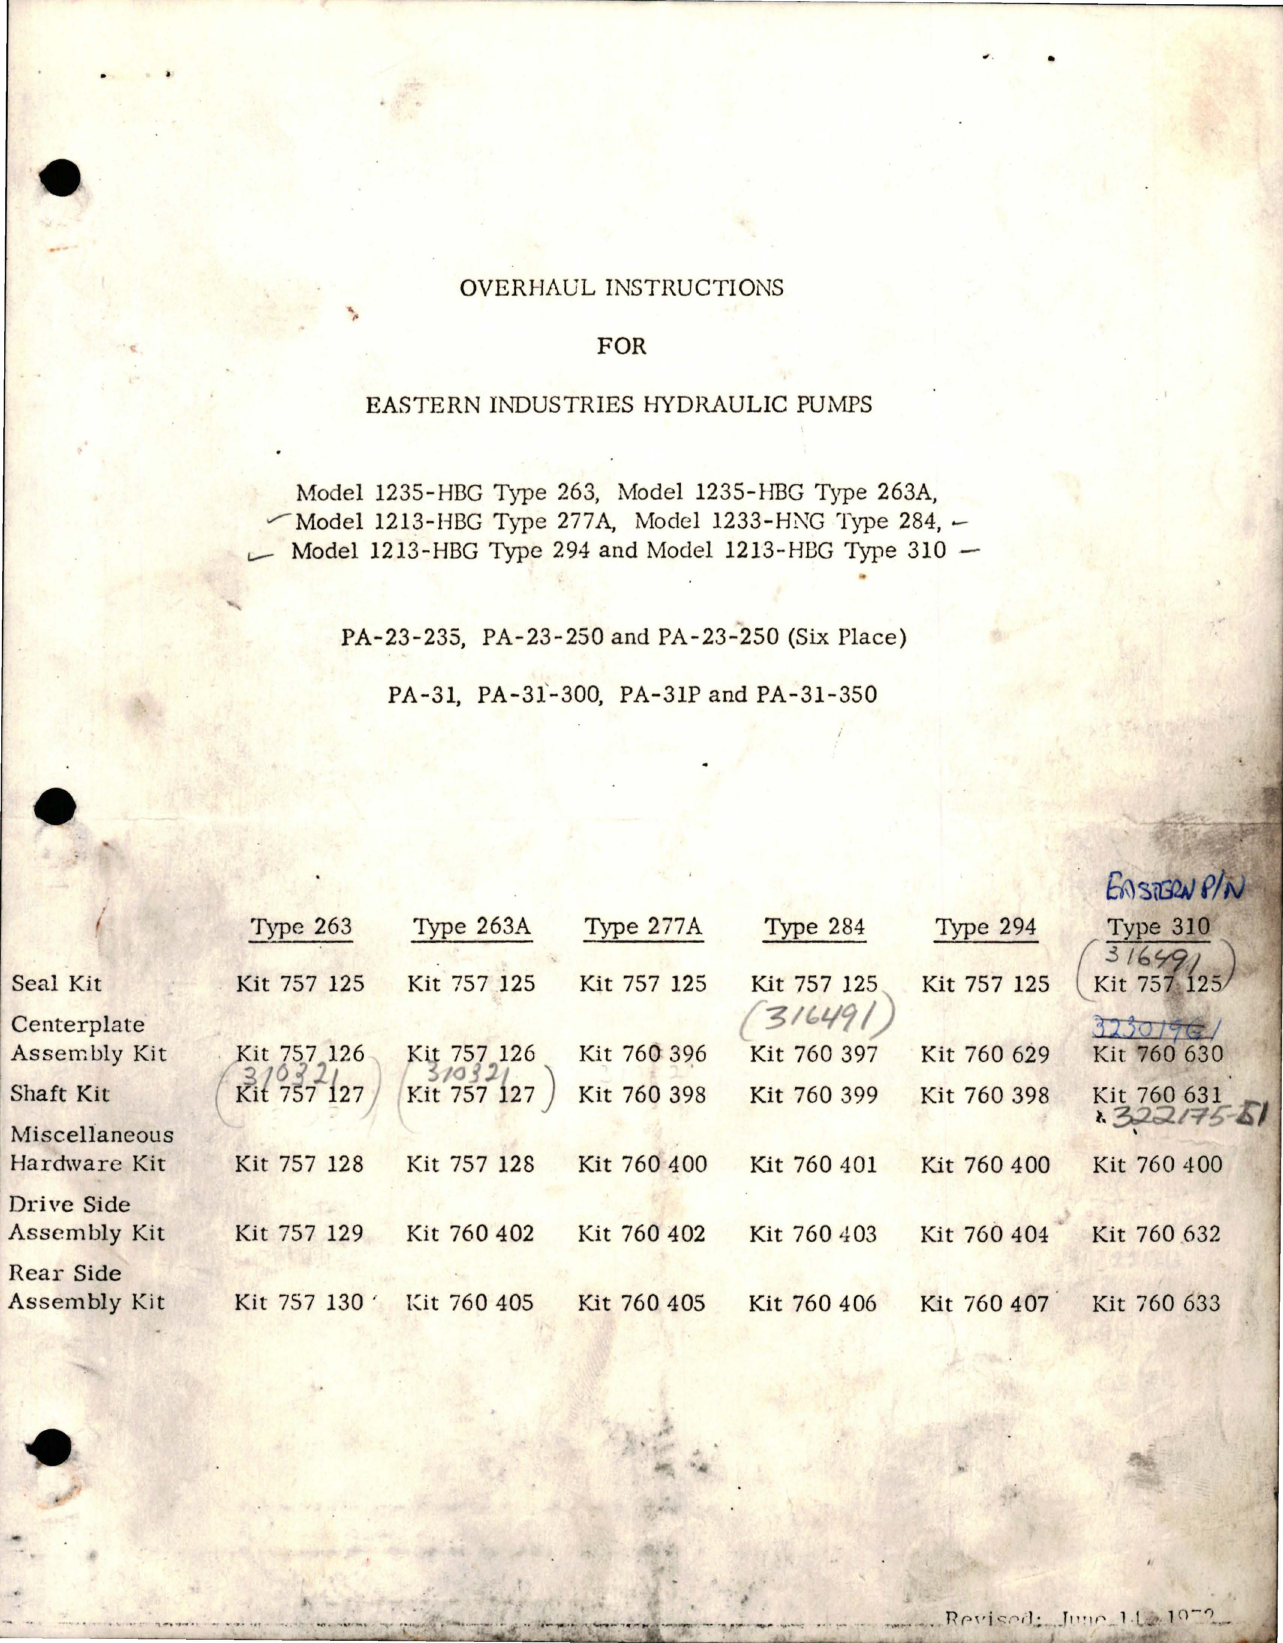 Sample page 1 from AirCorps Library document: Overhaul Instructions for Eastern Industries Hydraulic Pumps